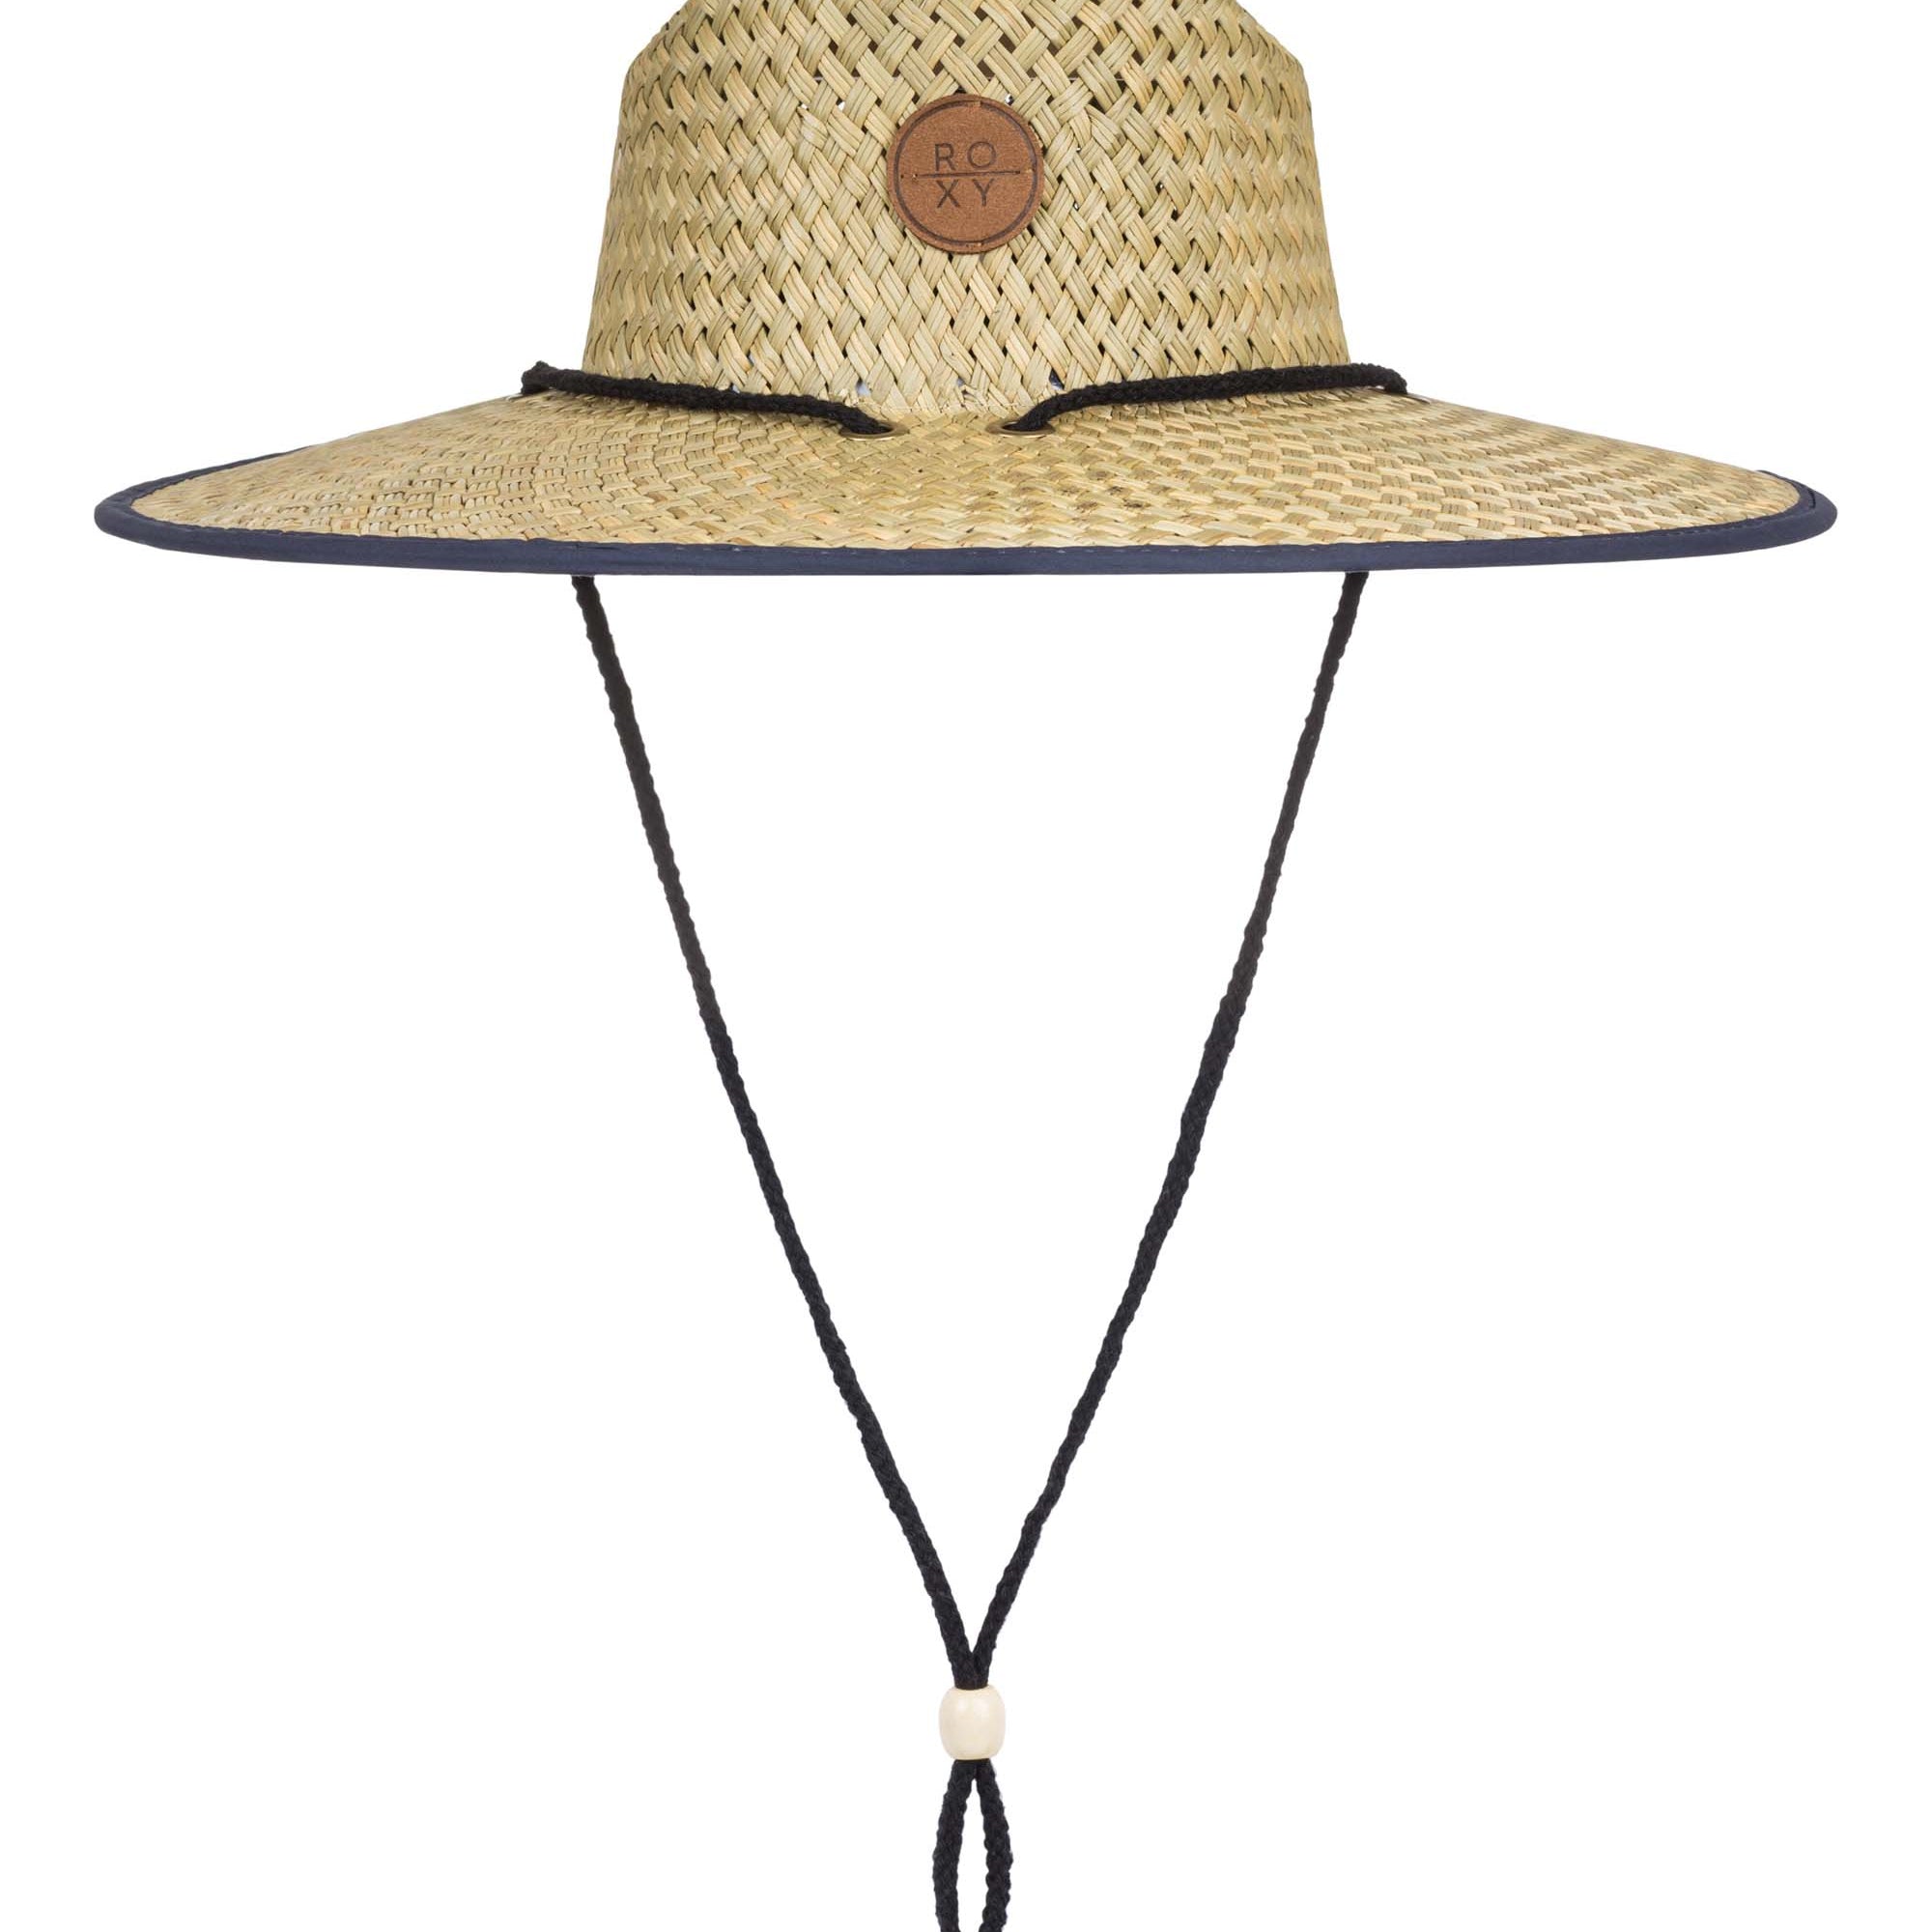 Roxy Pina to my Colada Straw Hat BSP0 OS